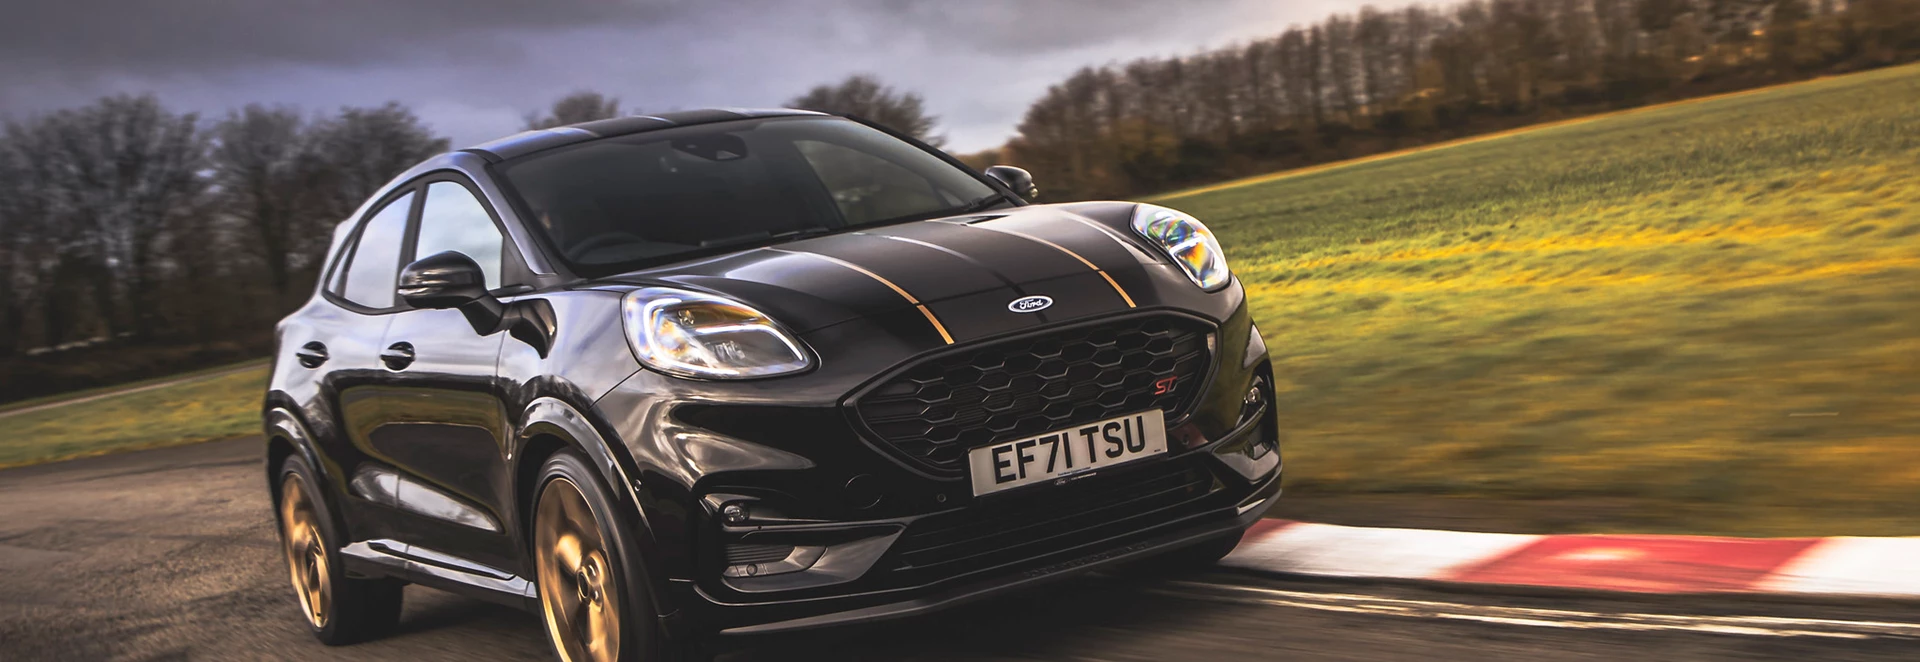 New Ford Puma: everything you need to know